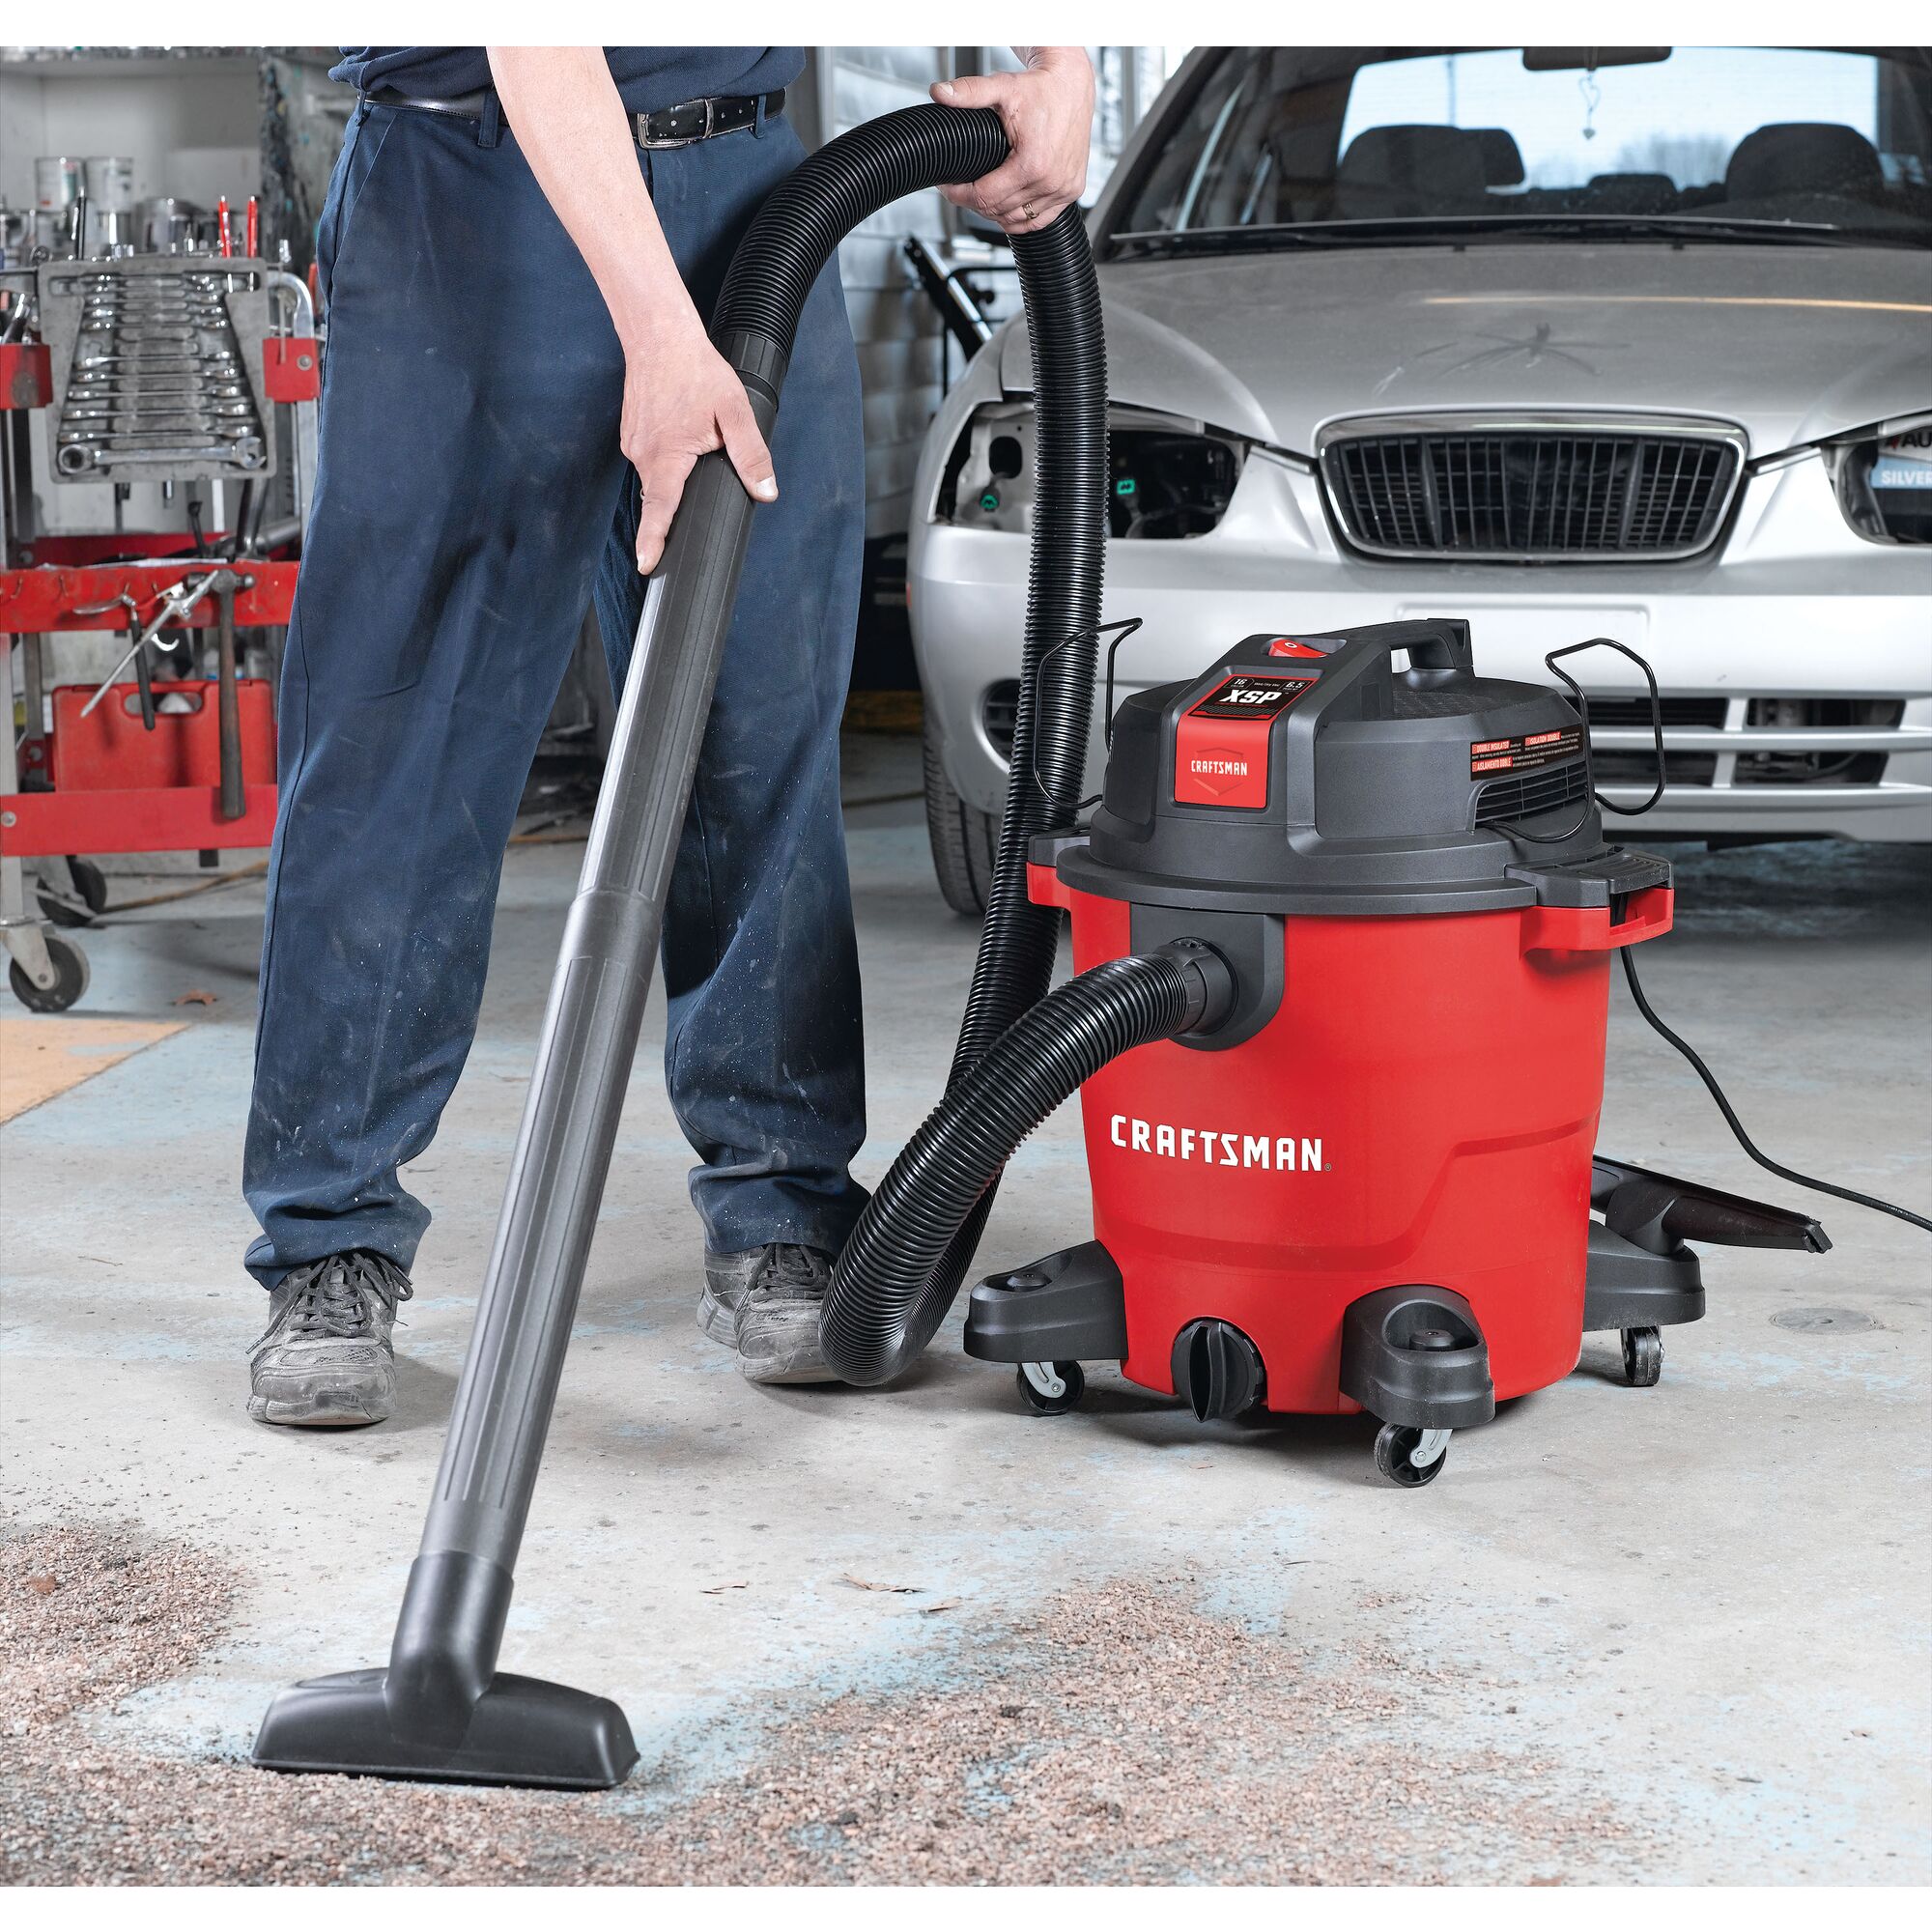 View of CRAFTSMAN Vacuums: Wet/Dry Shop Vac being used by consumer